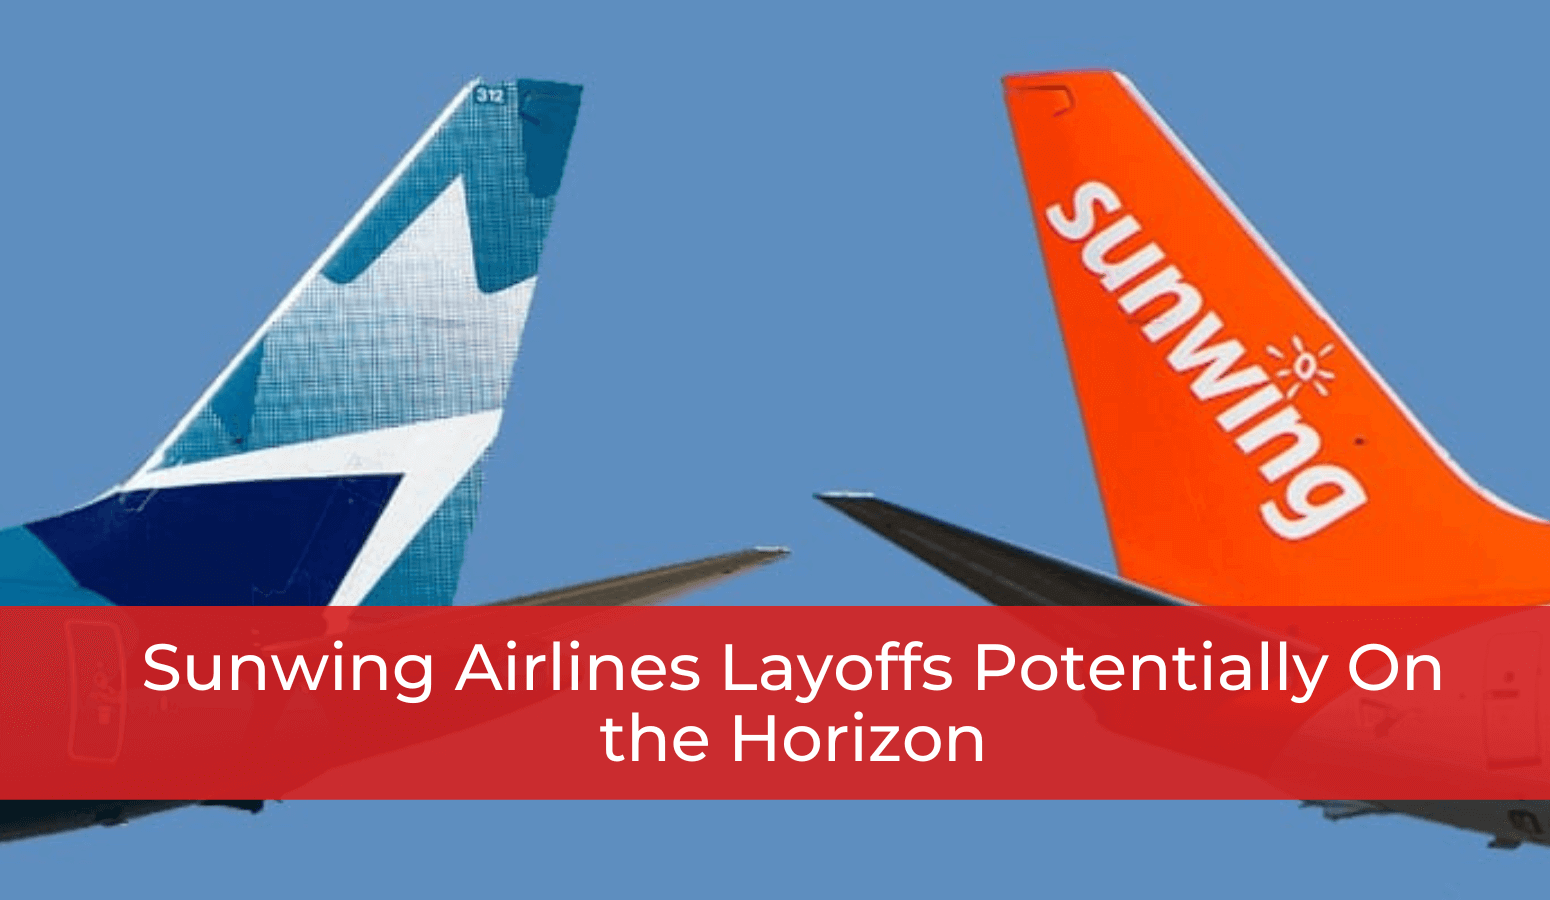 Featured image for “Sunwing Airlines Layoffs Potentially On the Horizon”